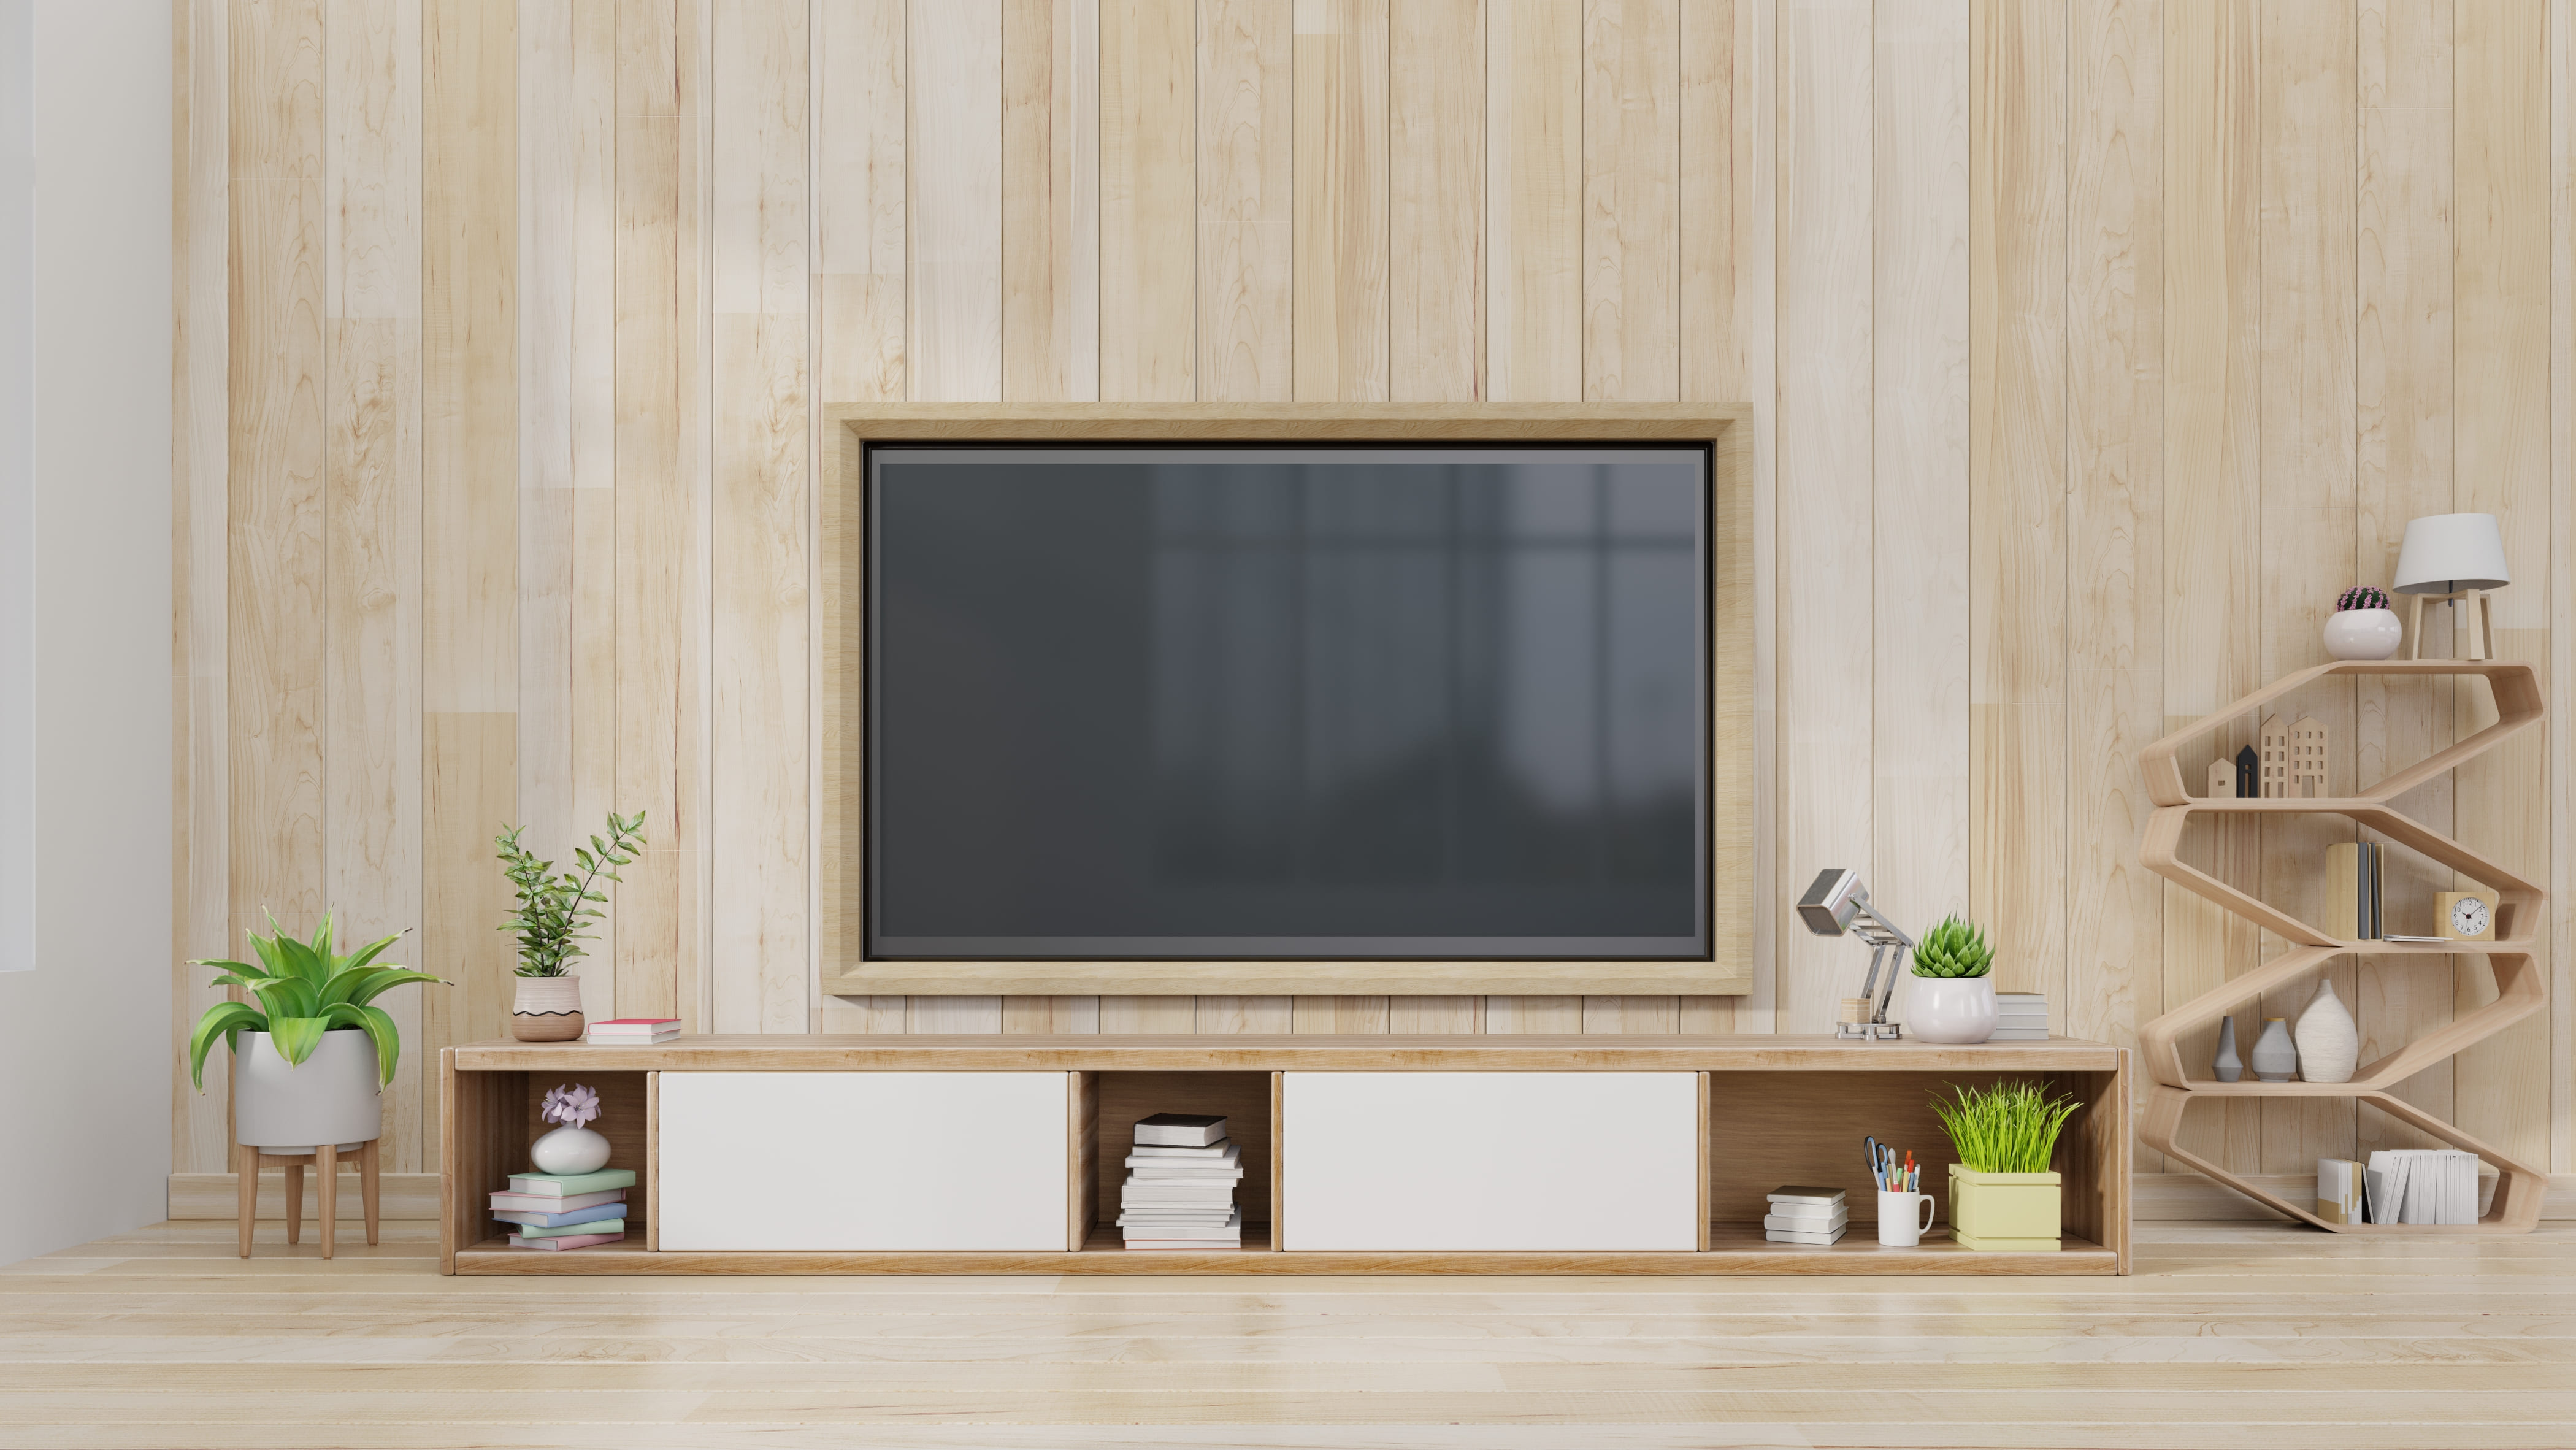 Tv Cabinet Stock Photos and Images  123RF